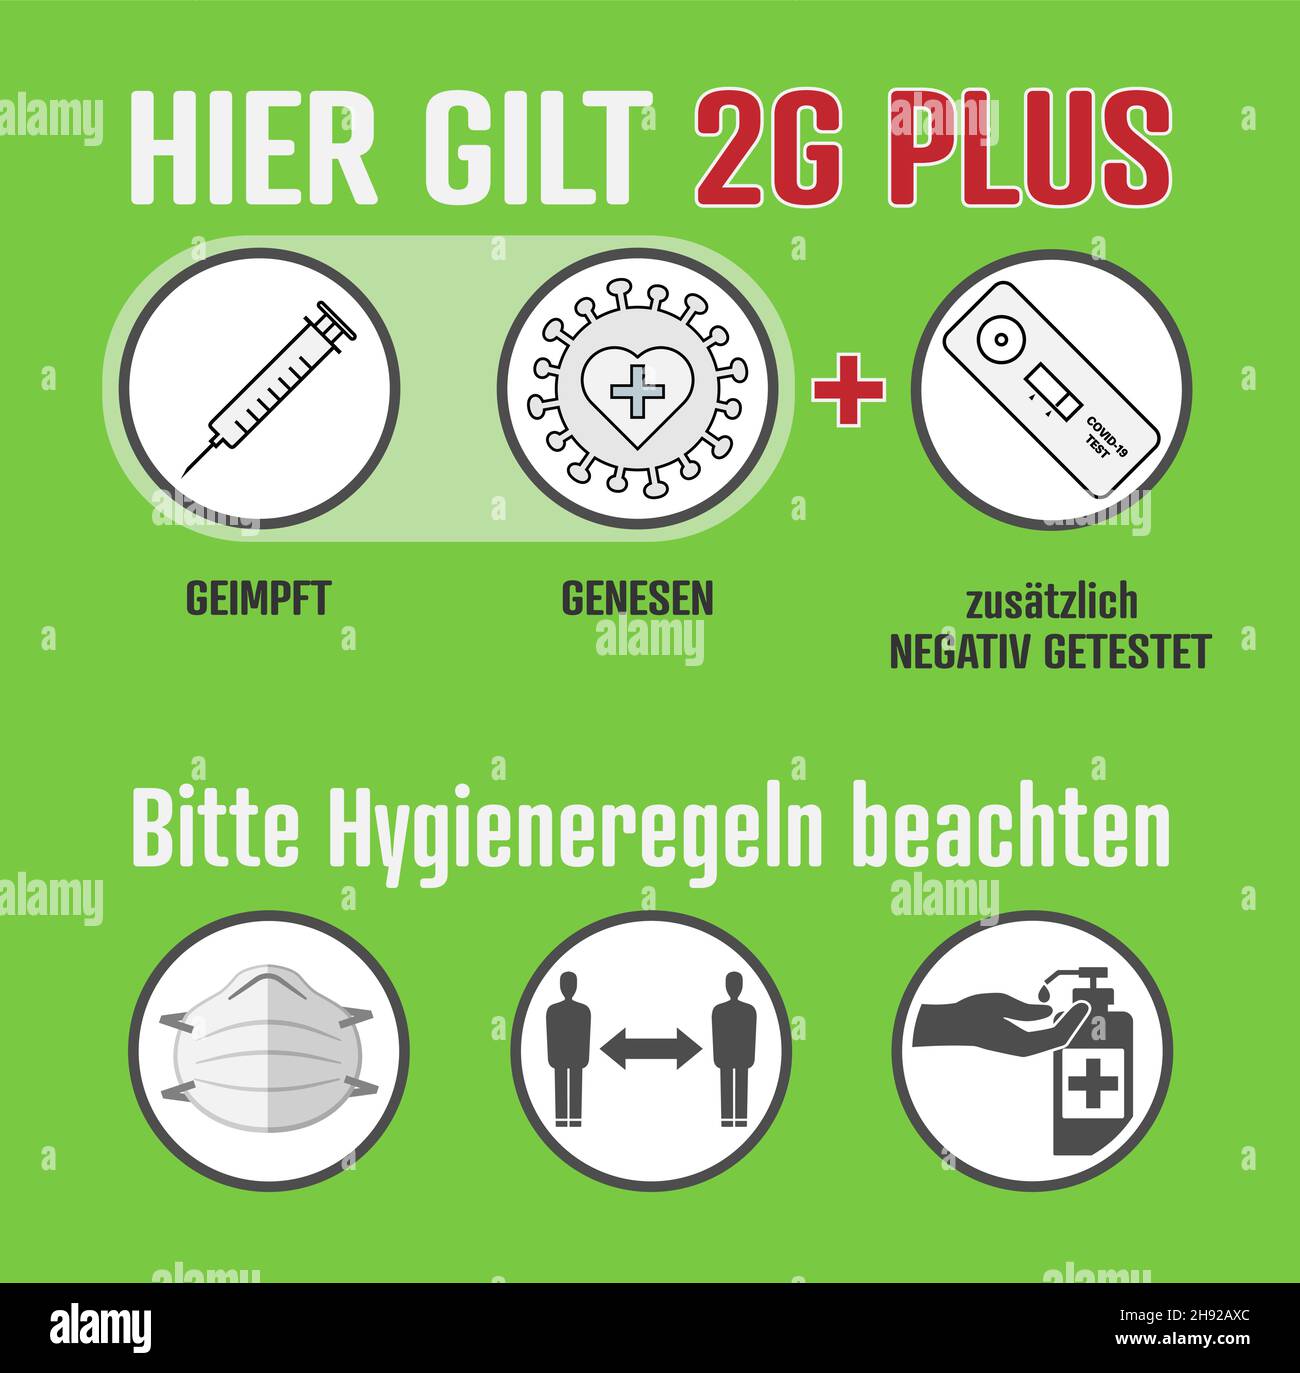 Covid 2G PLUS rules and hygiene measures in German language, access only for vaccinated (GEIMPFT) and recovered (GENESEN) persons with additional Stock Vector